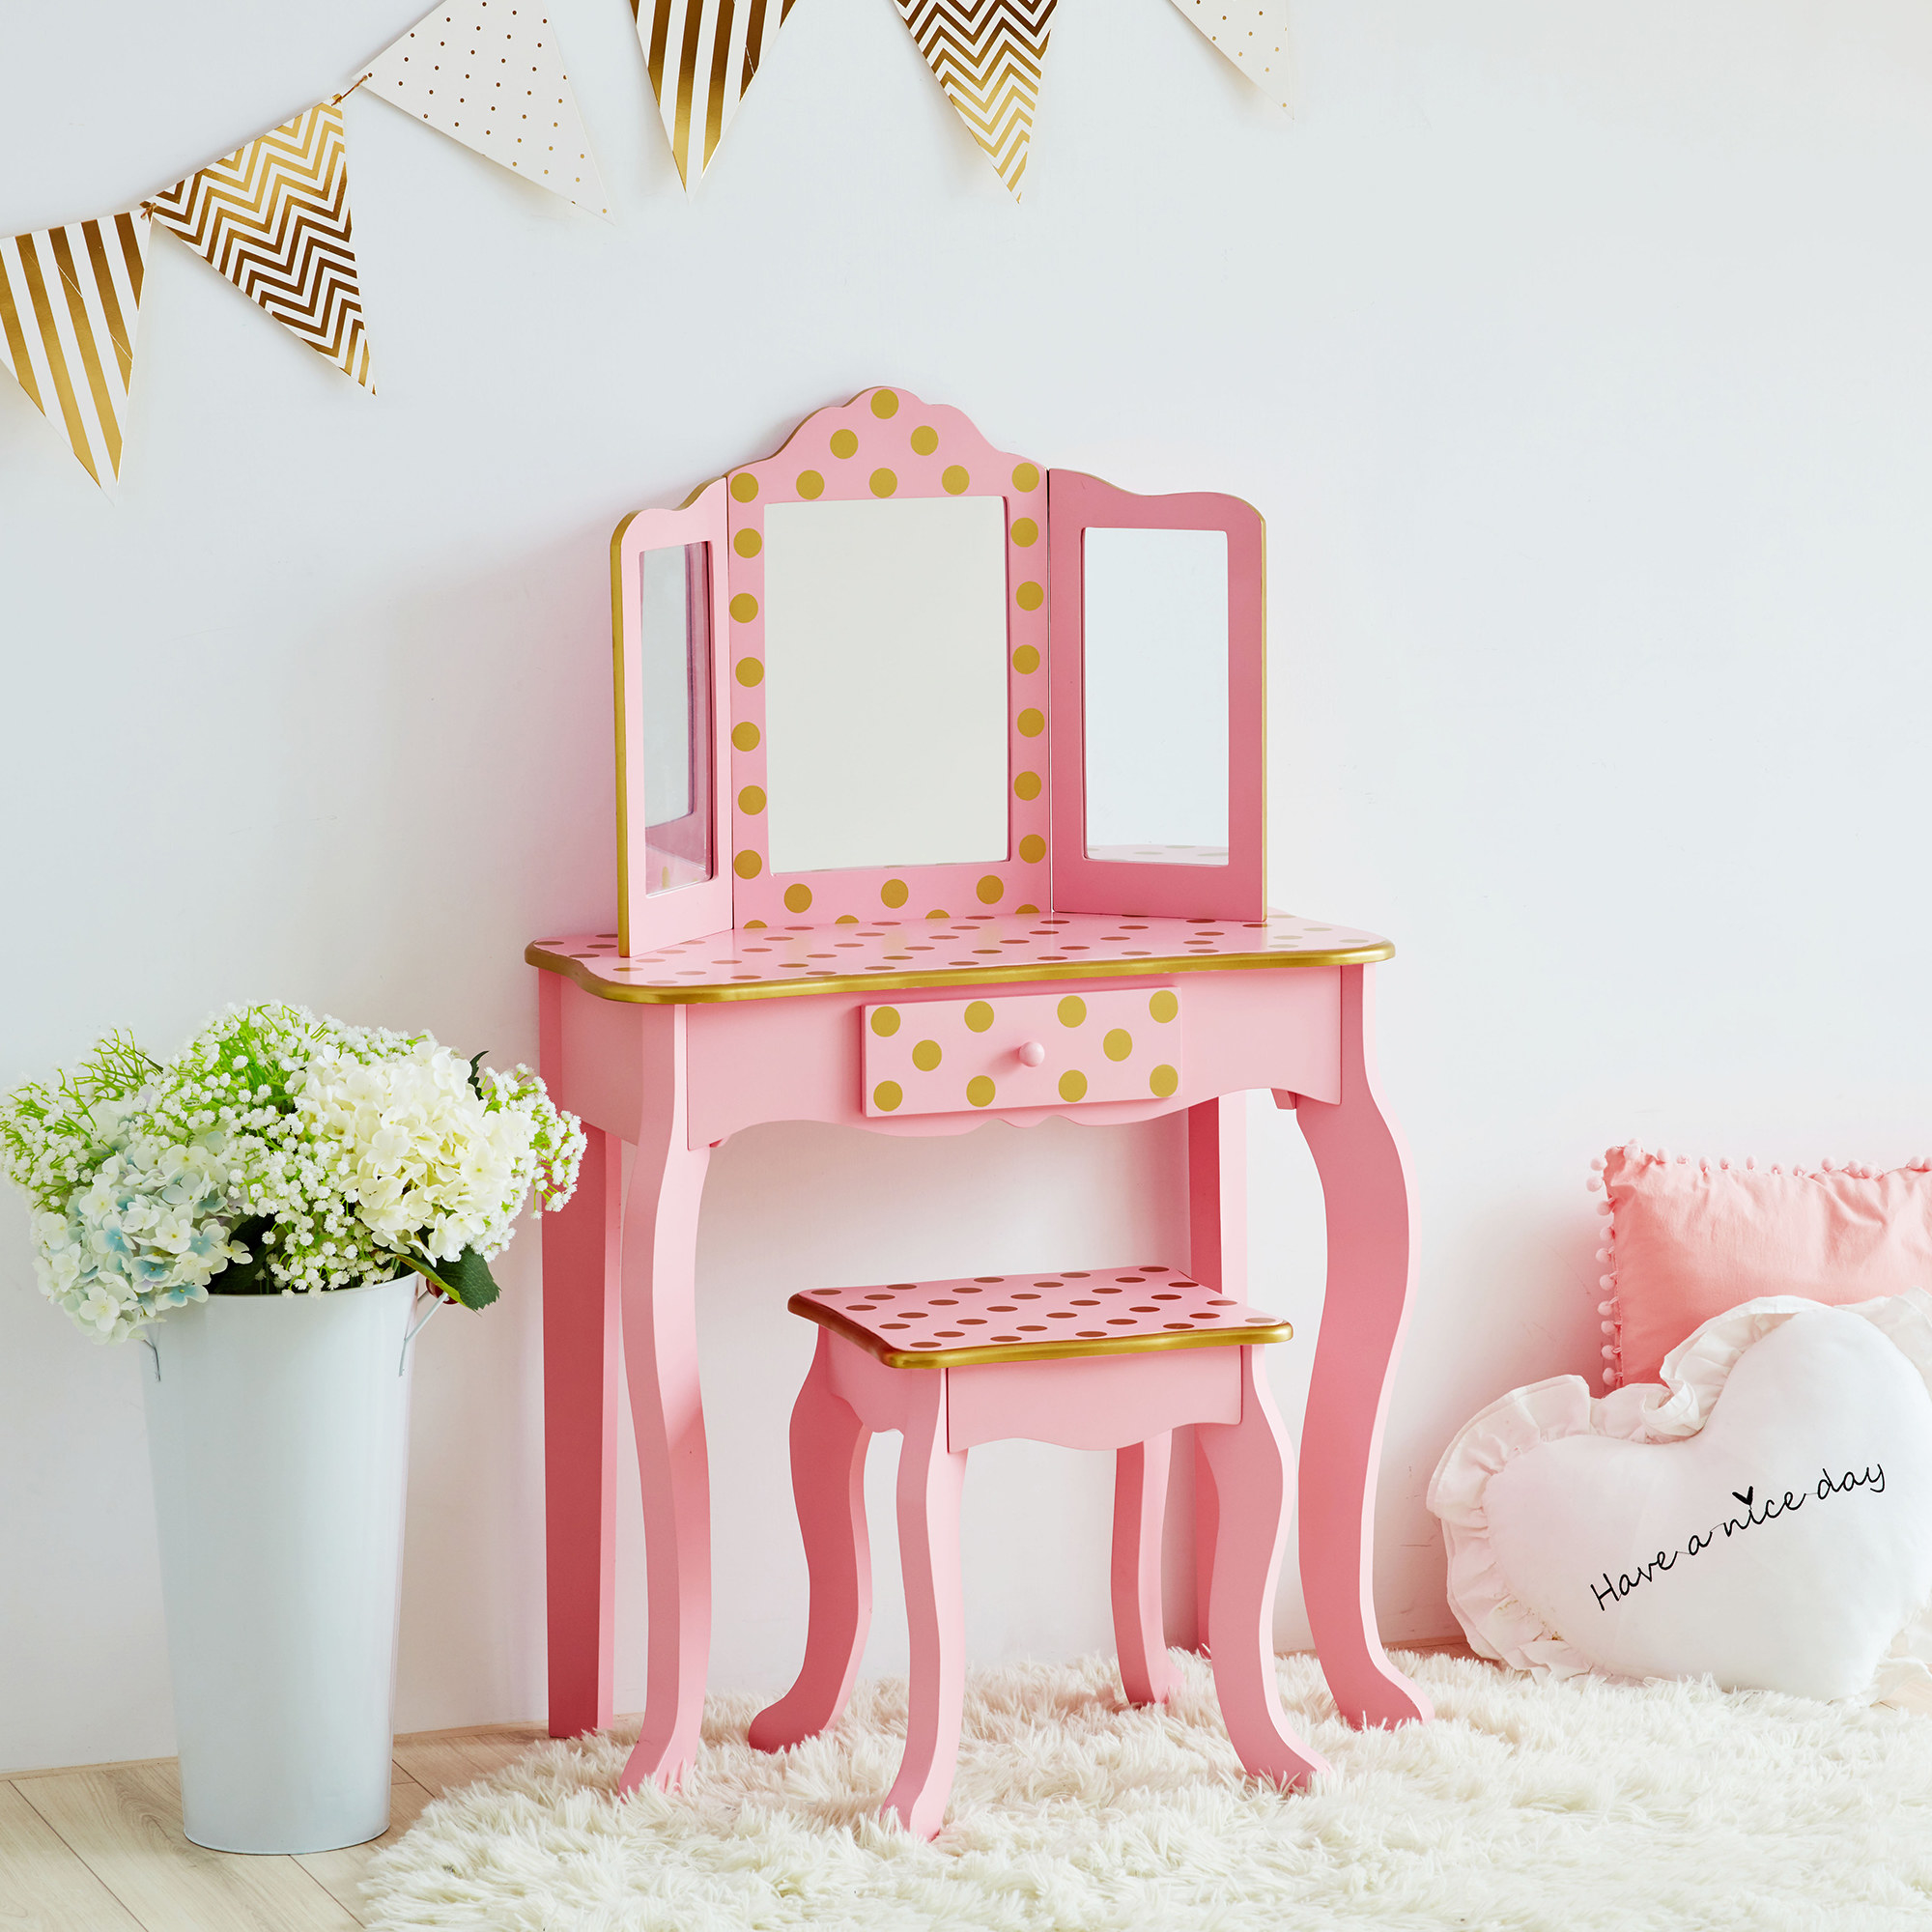 A pink and gold polka dotted vanity in a room